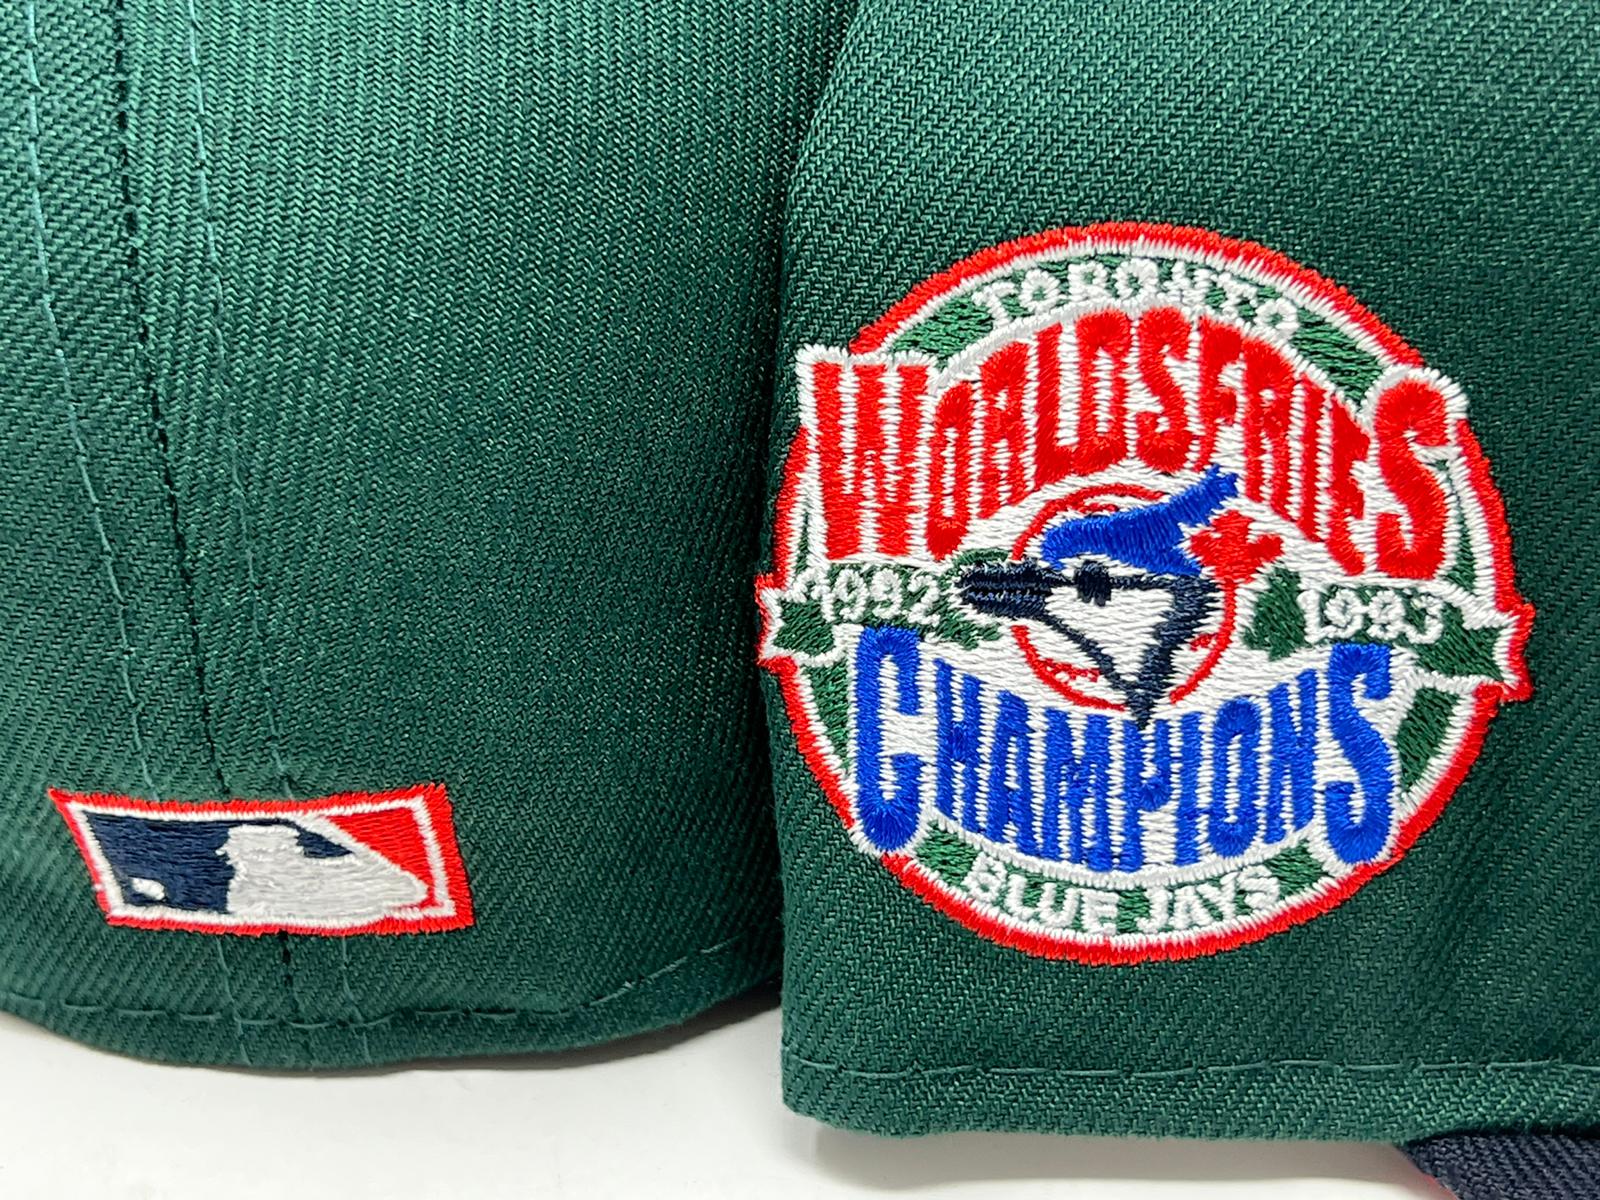 TORONTO BLUE JAYS 1992-93 WORLD SERIES CHAMPIONS GREEN DOME RED